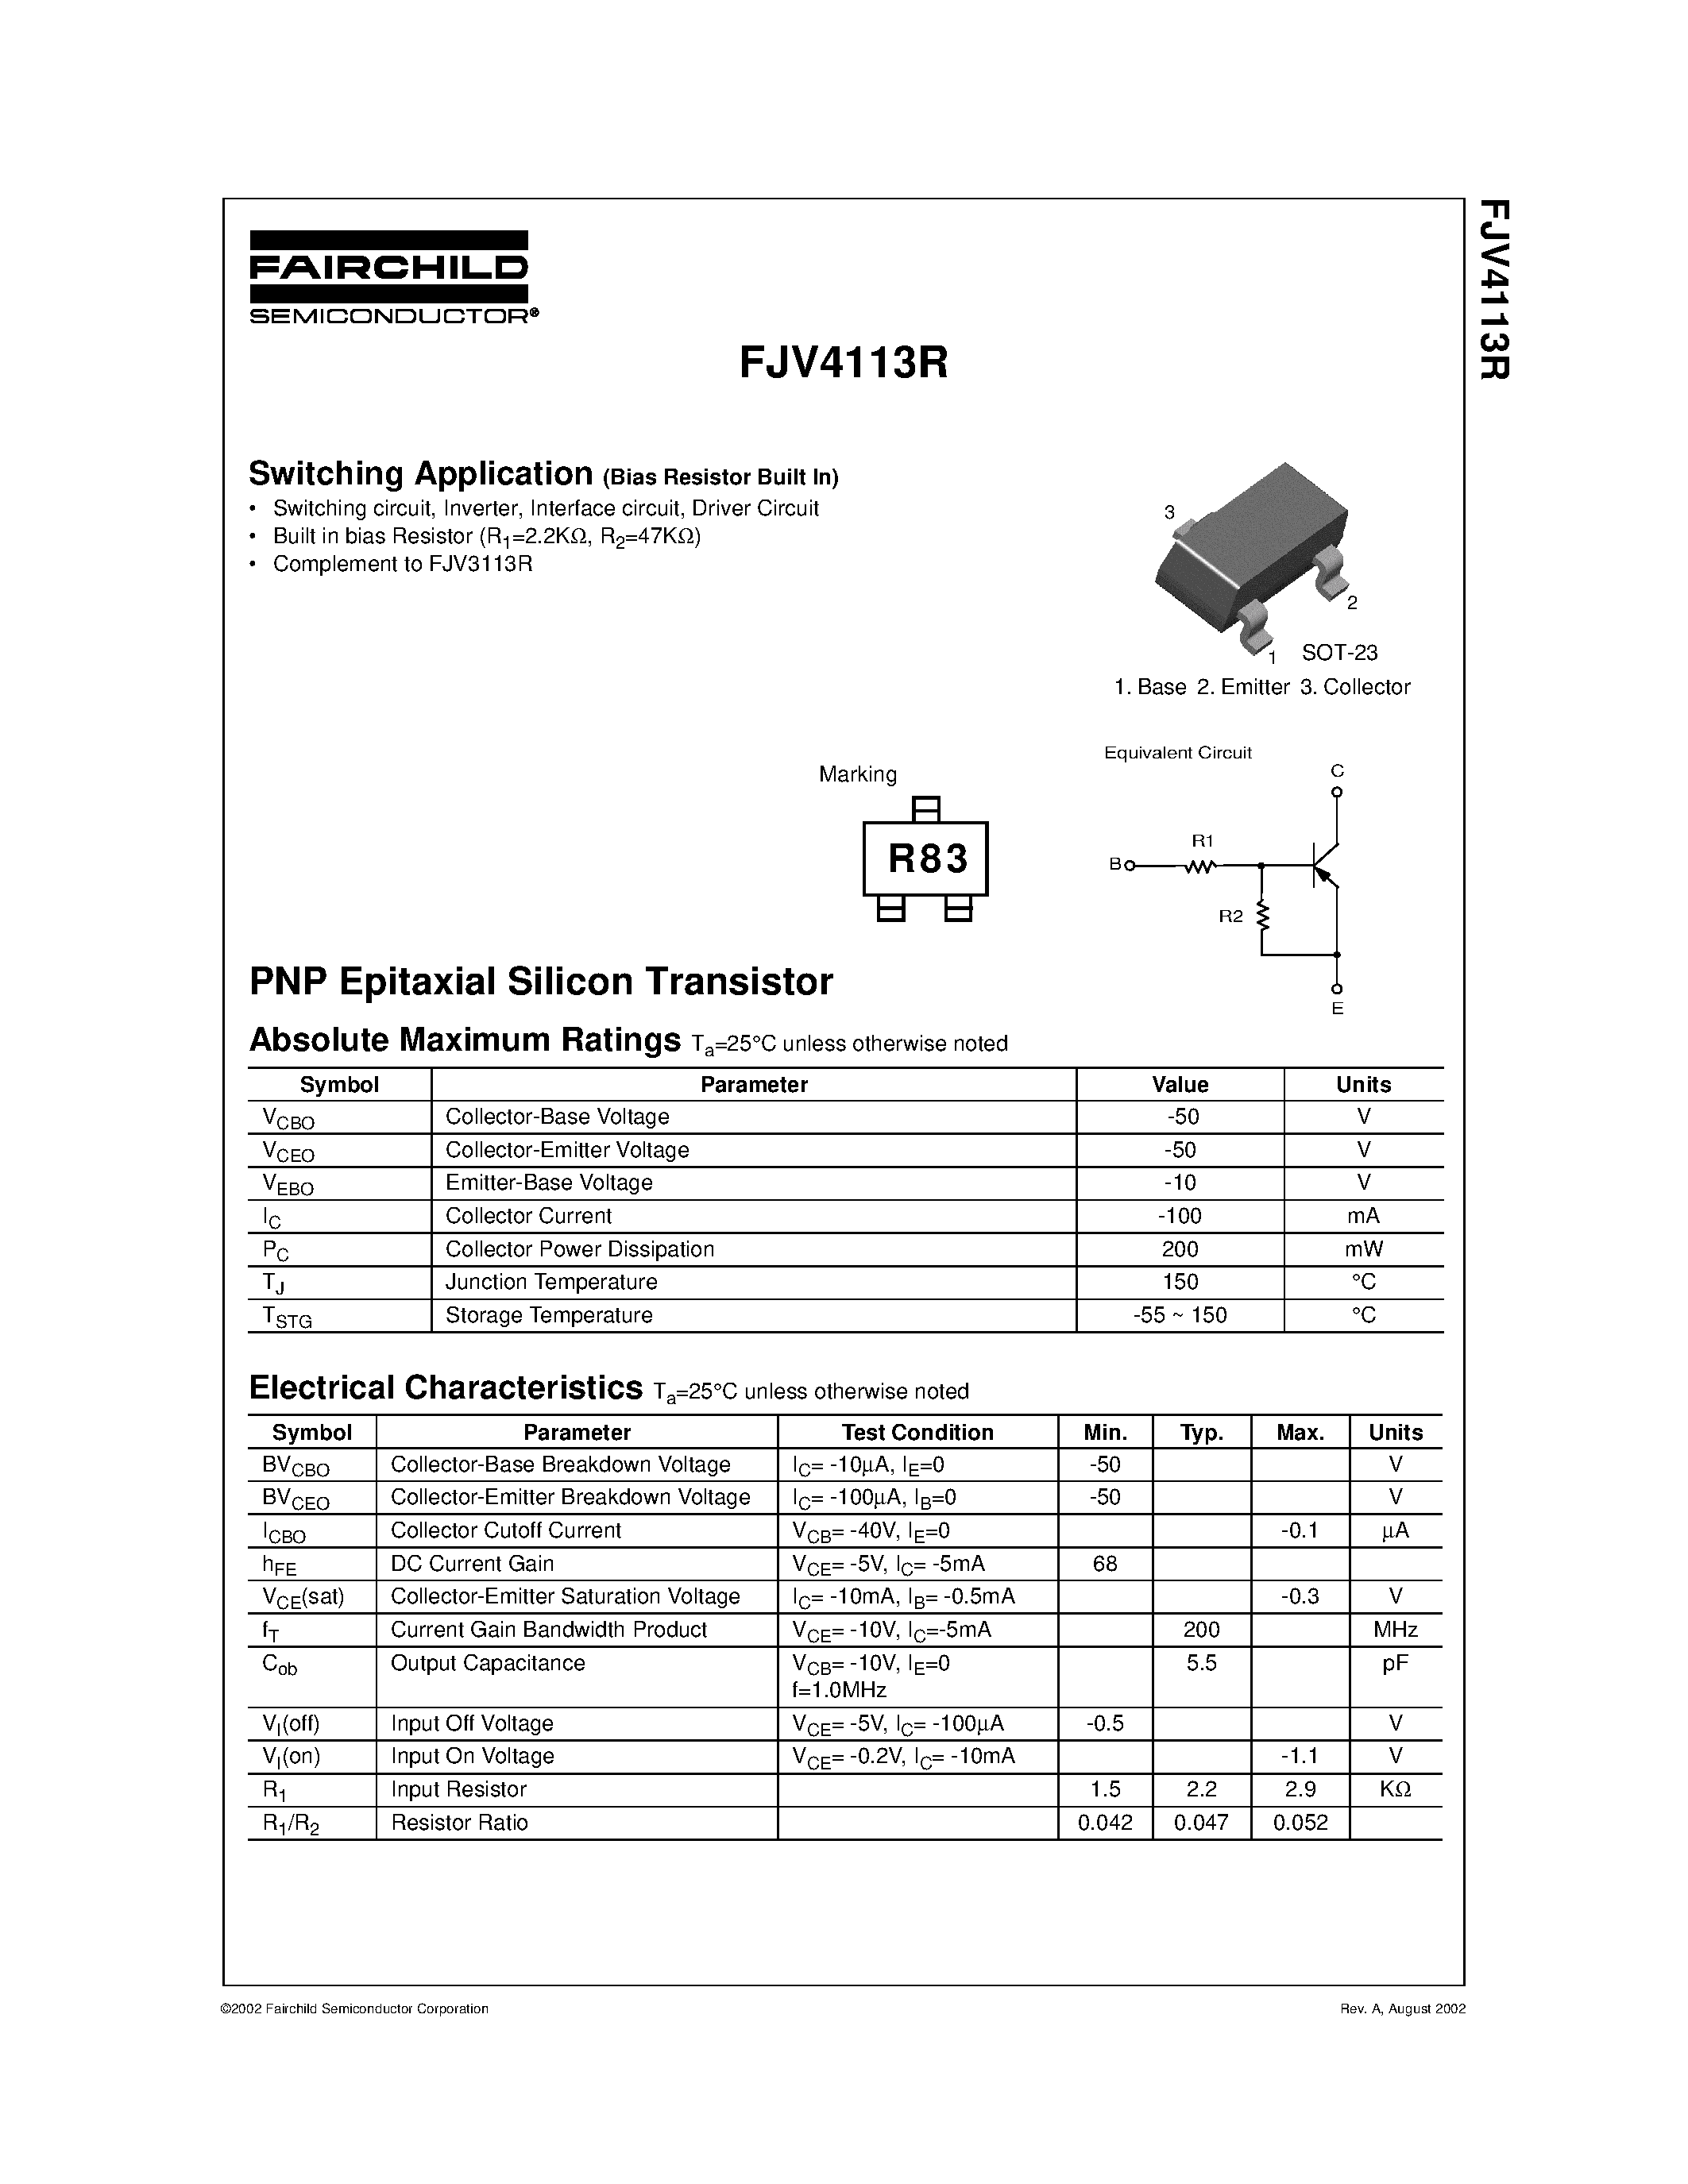 Даташит FJV4113R - PNP Epitaxial Silicon Transistor страница 1